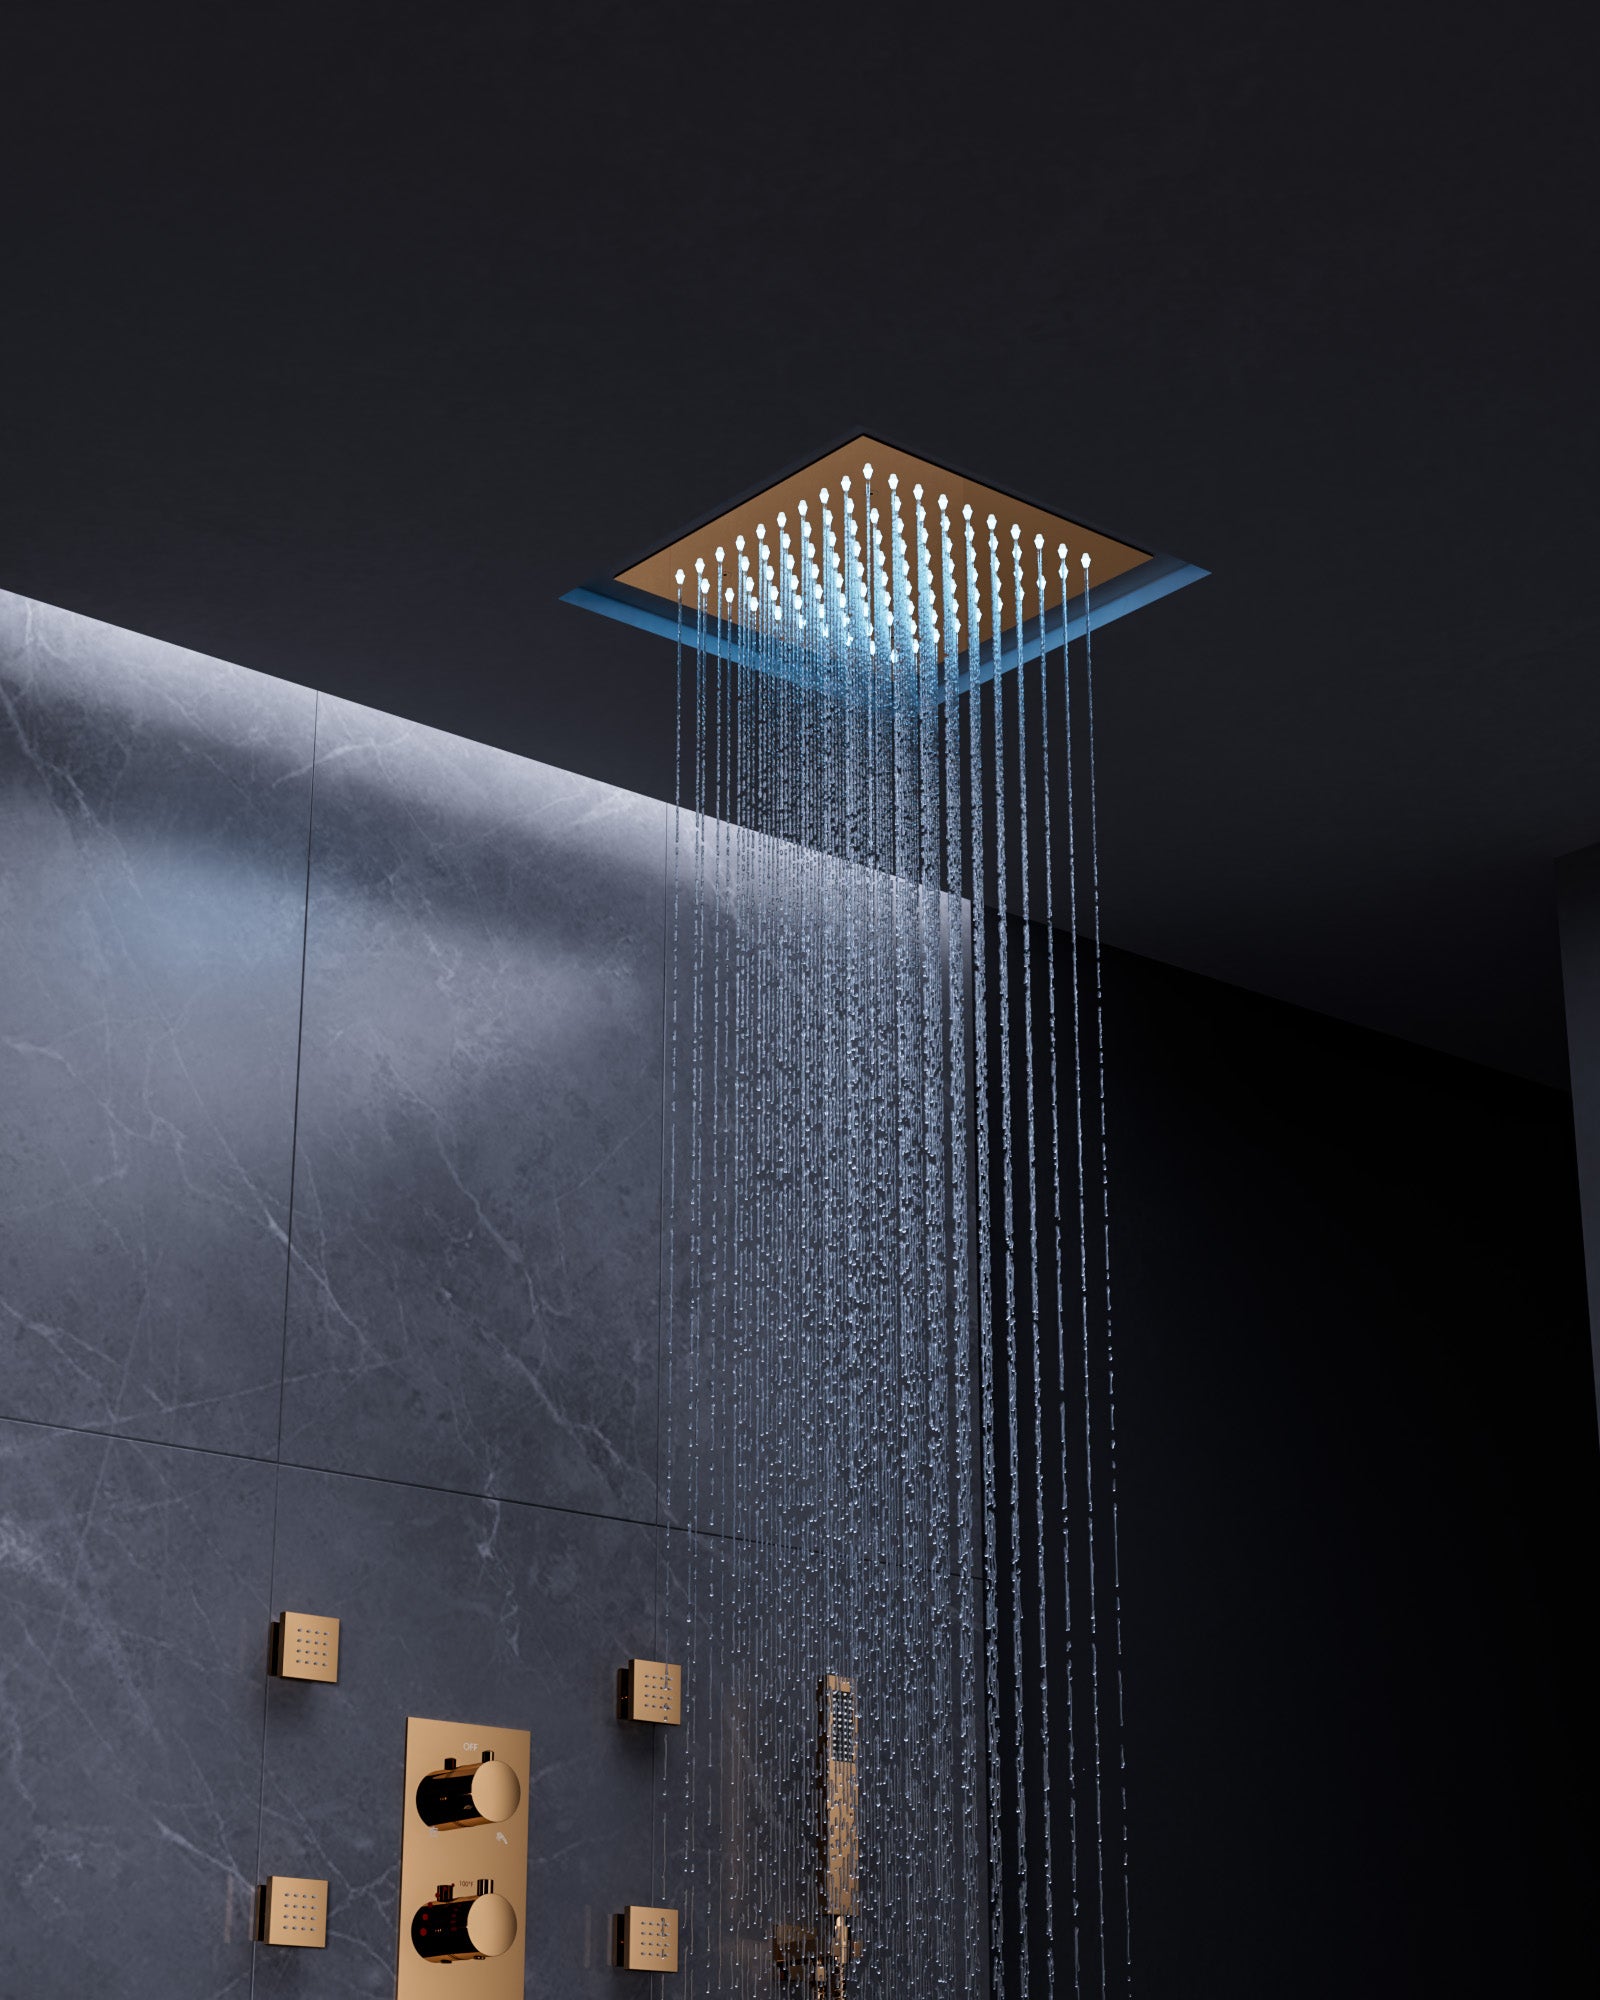 EVERSTEIN Rose Gold Luxury Rain Shower System - 12" Ceiling Rainfall Head with Color Changing LED Lights & Body Massage Jets